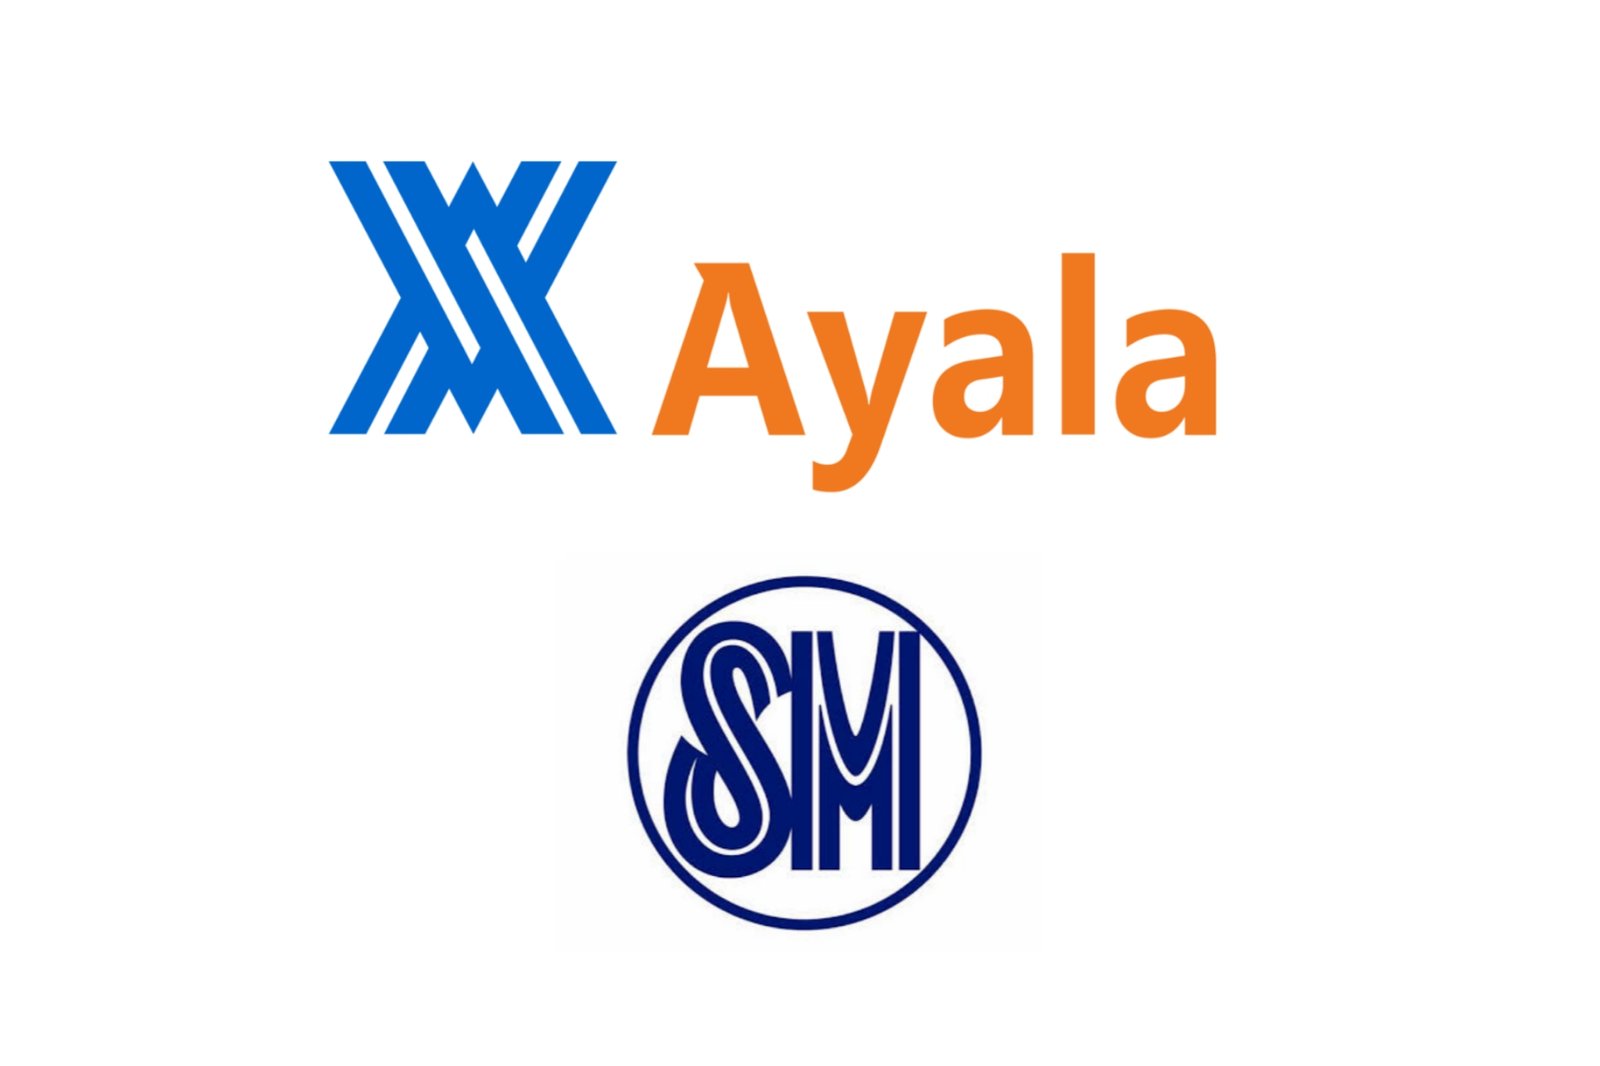 Ayala Group, SM donate 2.5B pesos for people affected by COVID-19 outbreak